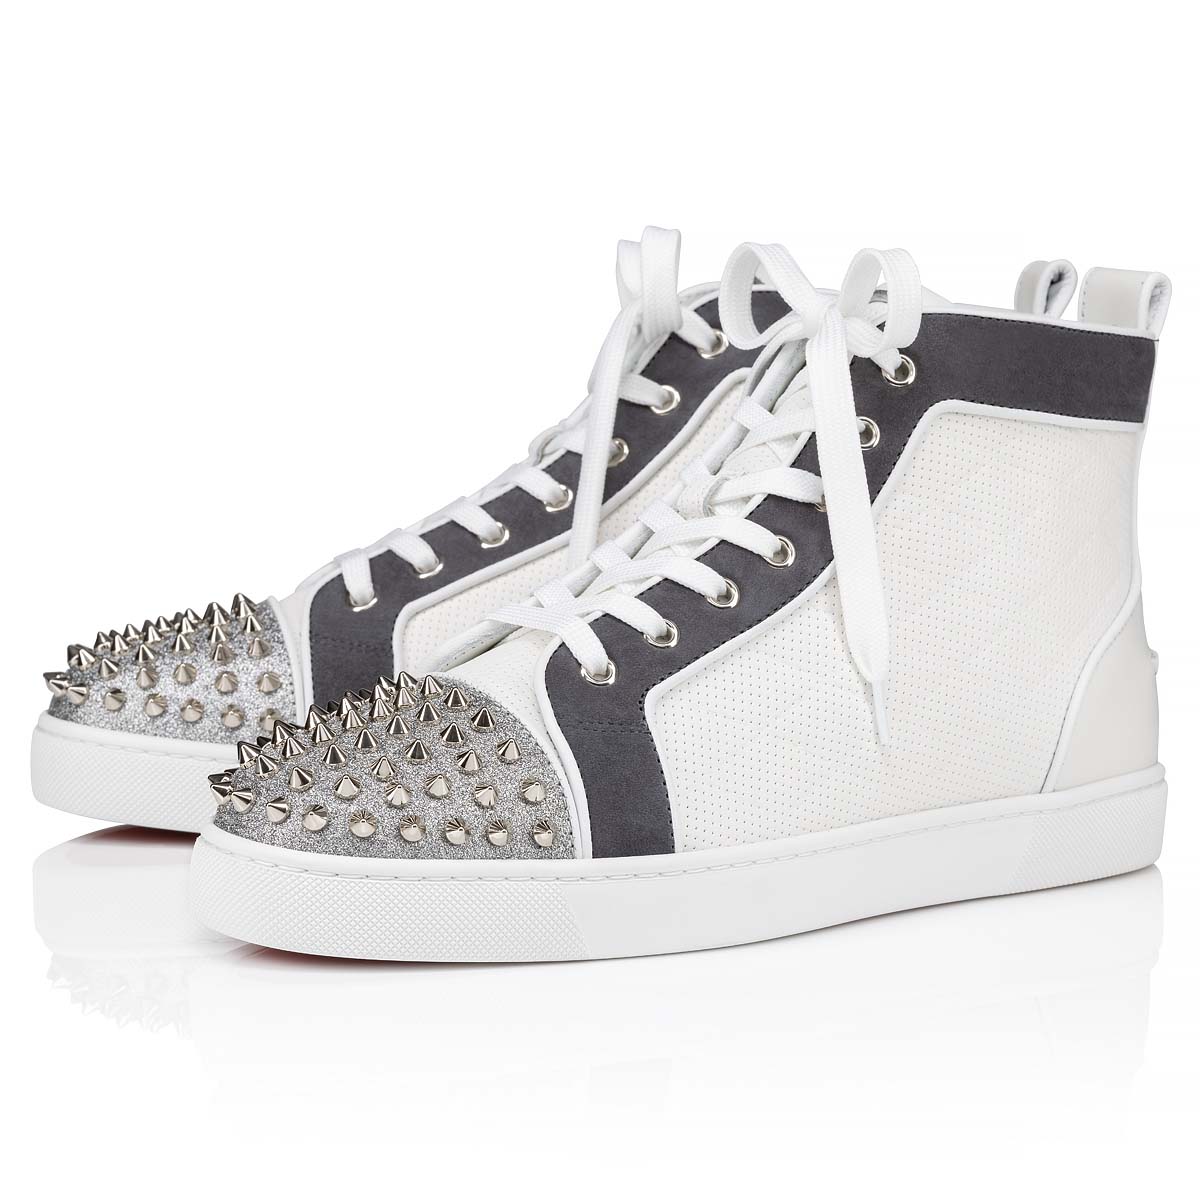 Lou Spikes - High-top sneakers - Calf leather and spikes - Black